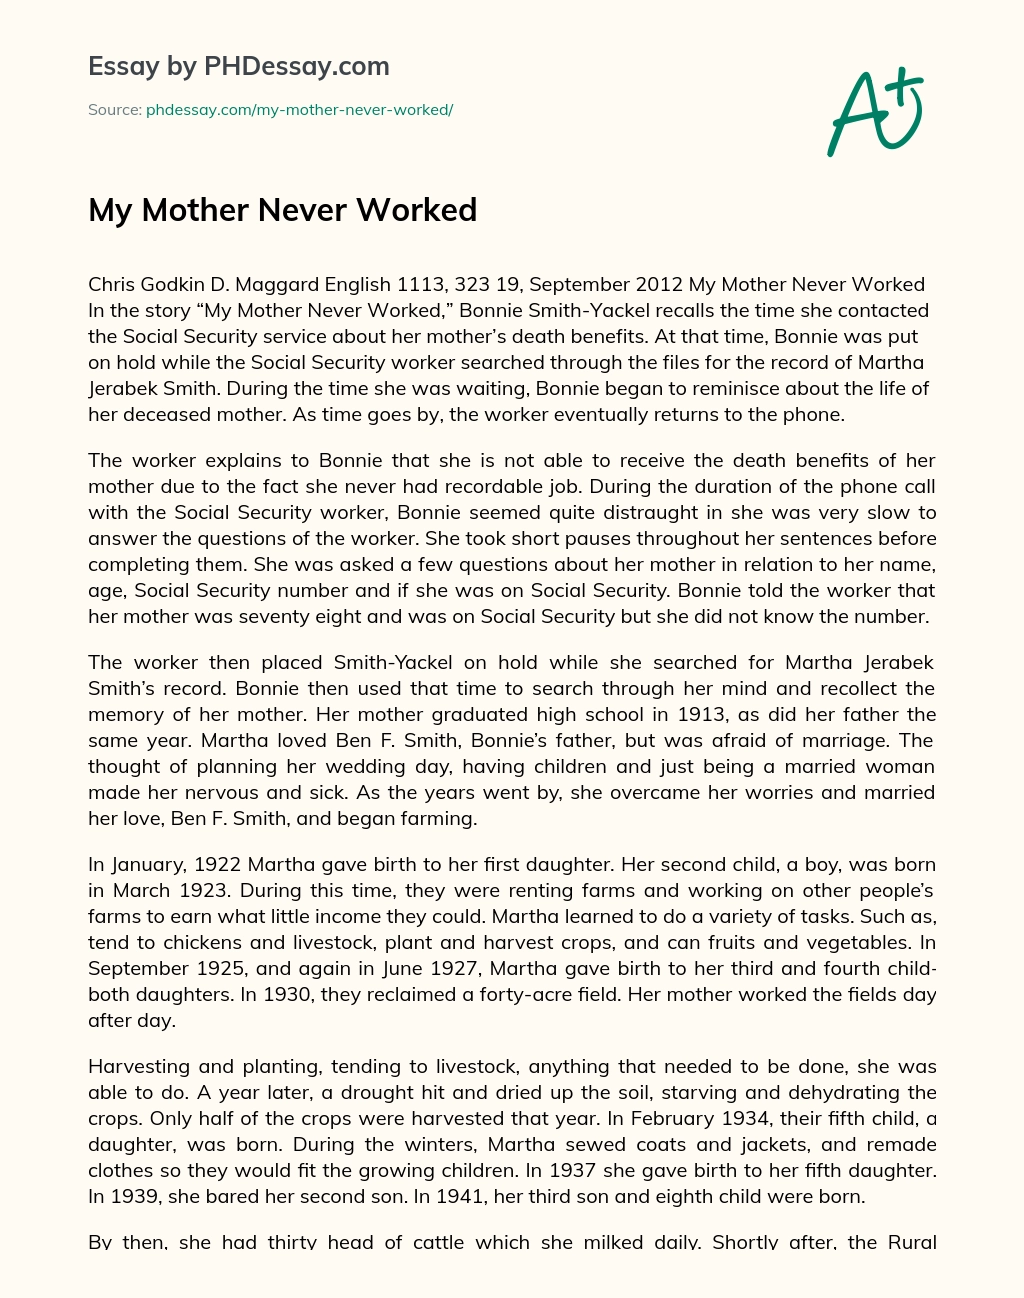 My Mother Never Worked essay